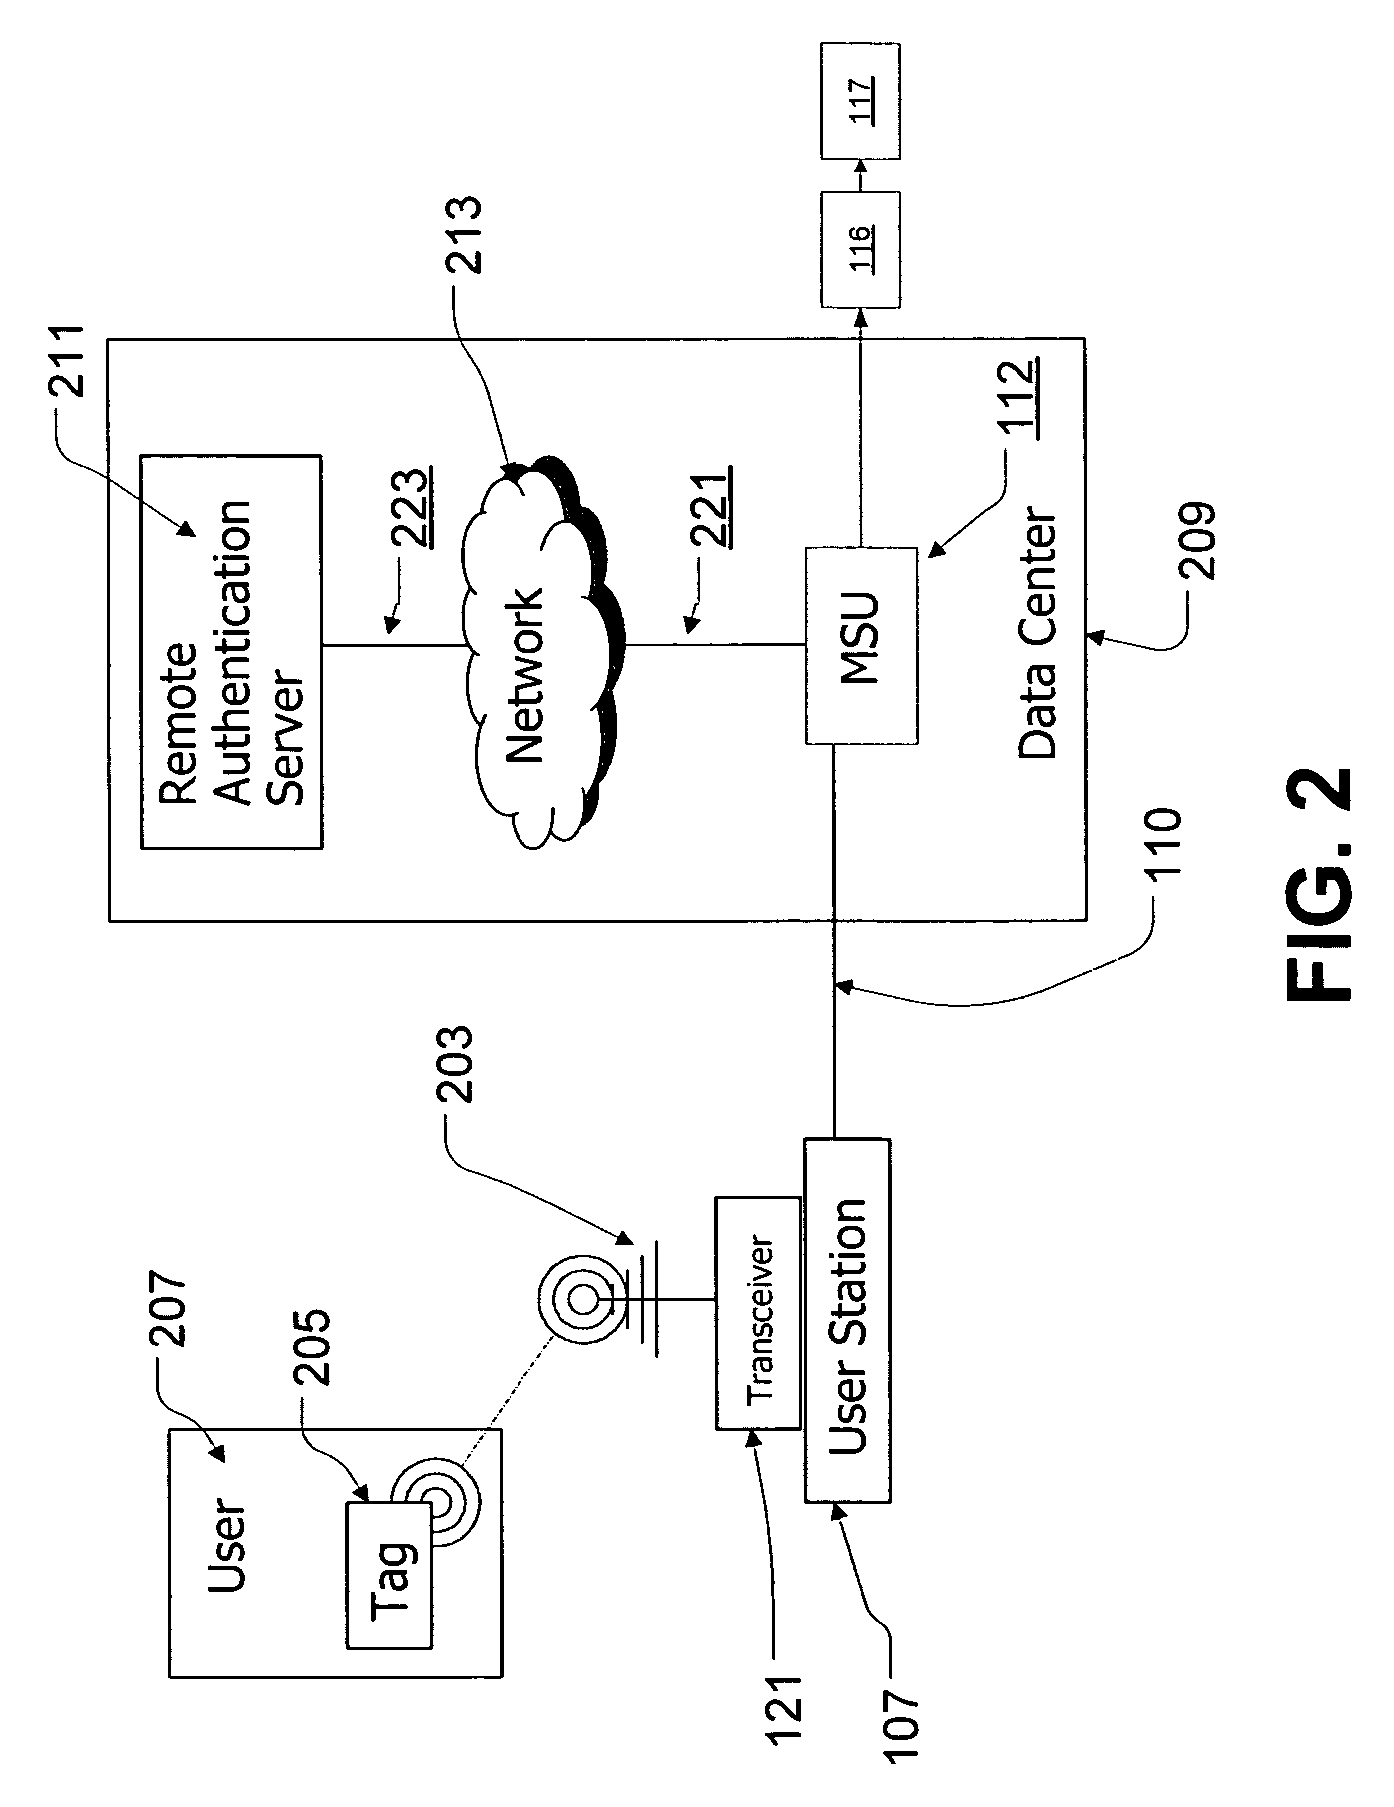 System for providing secure access to KVM switch and other server management systems